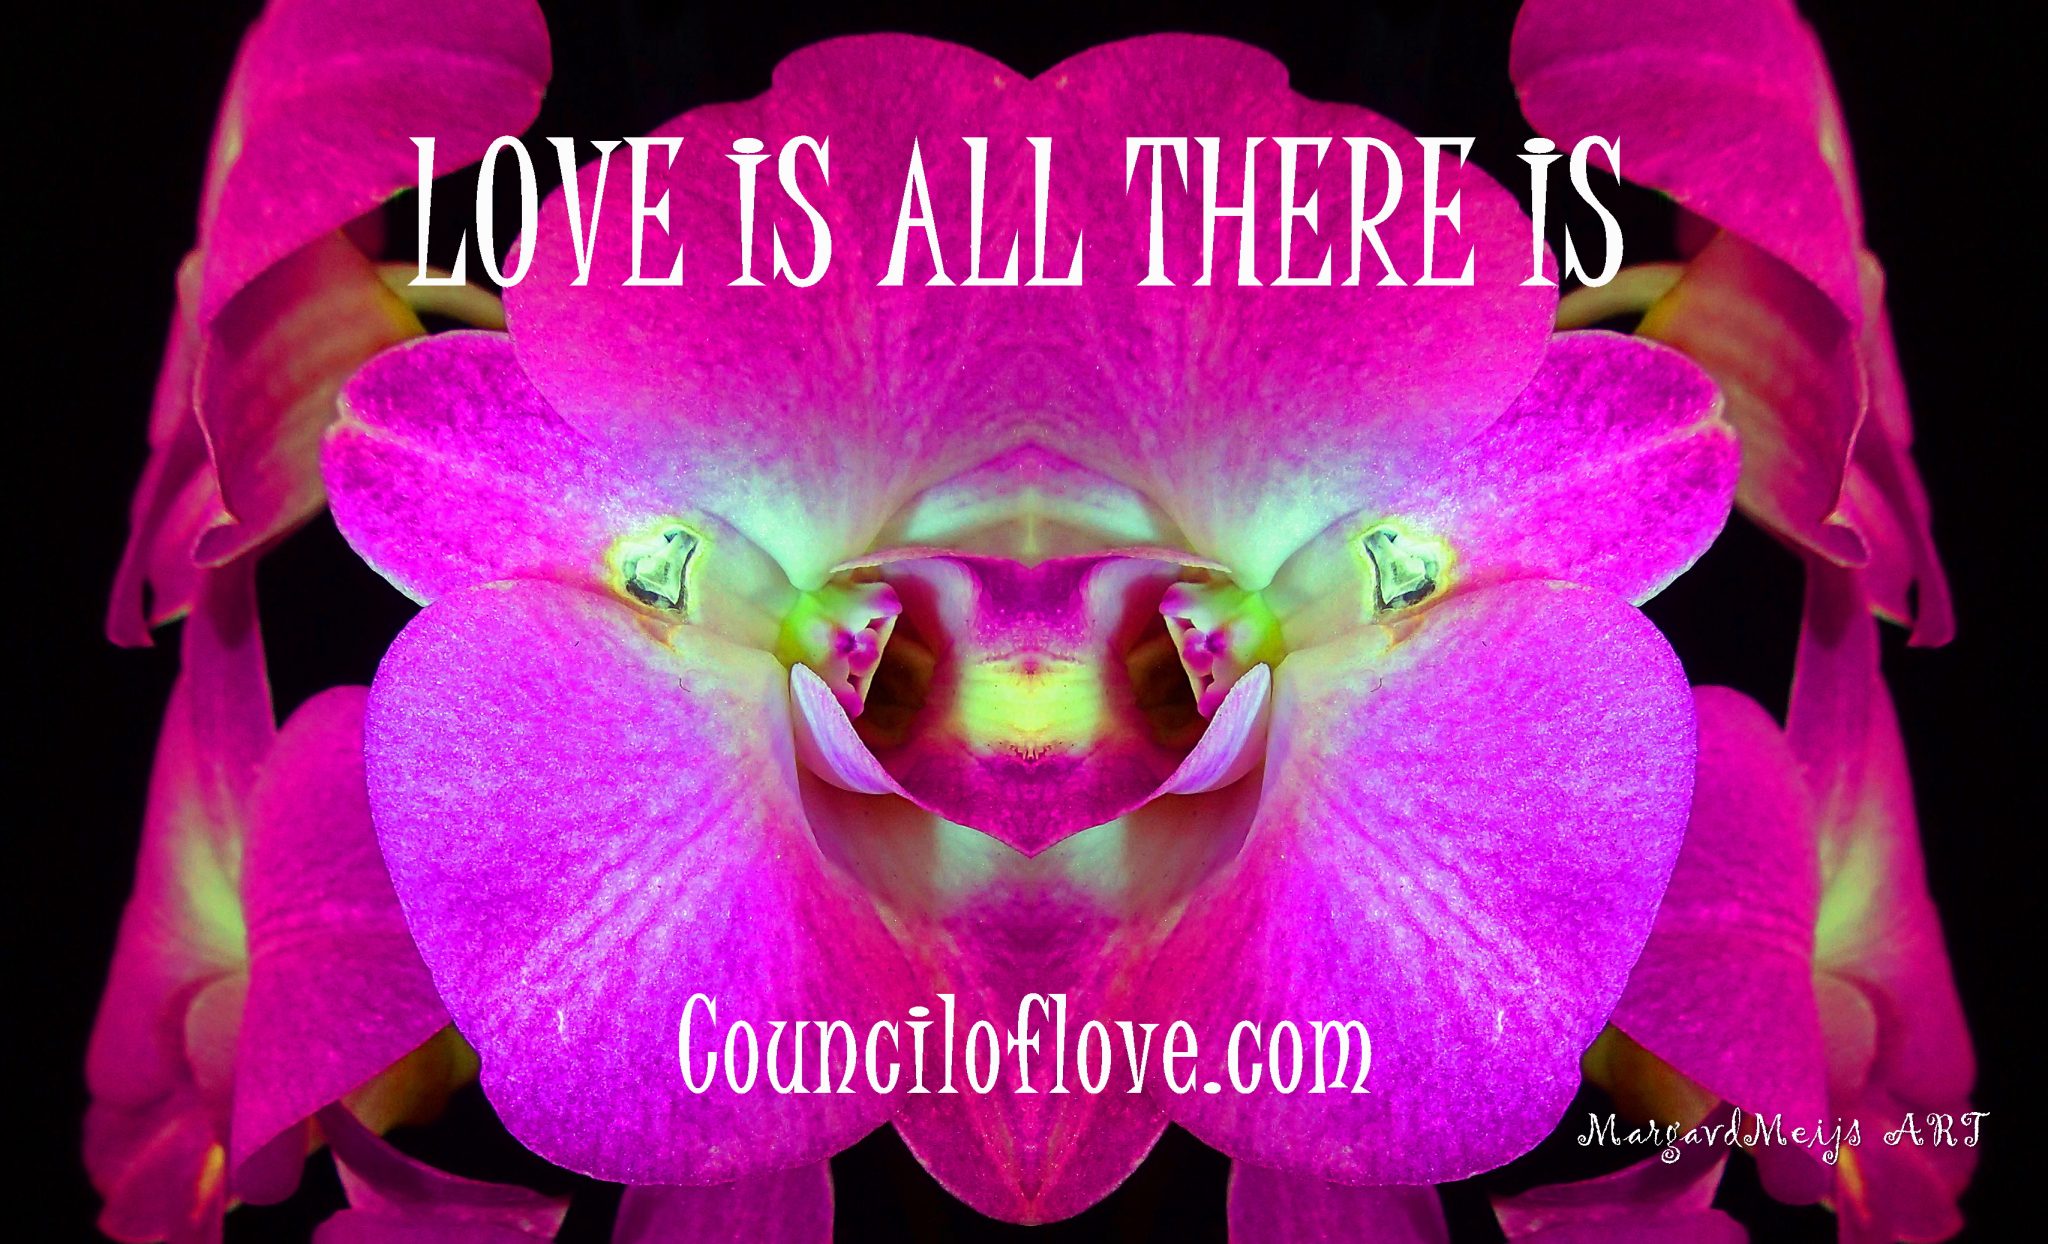 Love-is-all-there-is.jpg?profile=RESIZE_710x